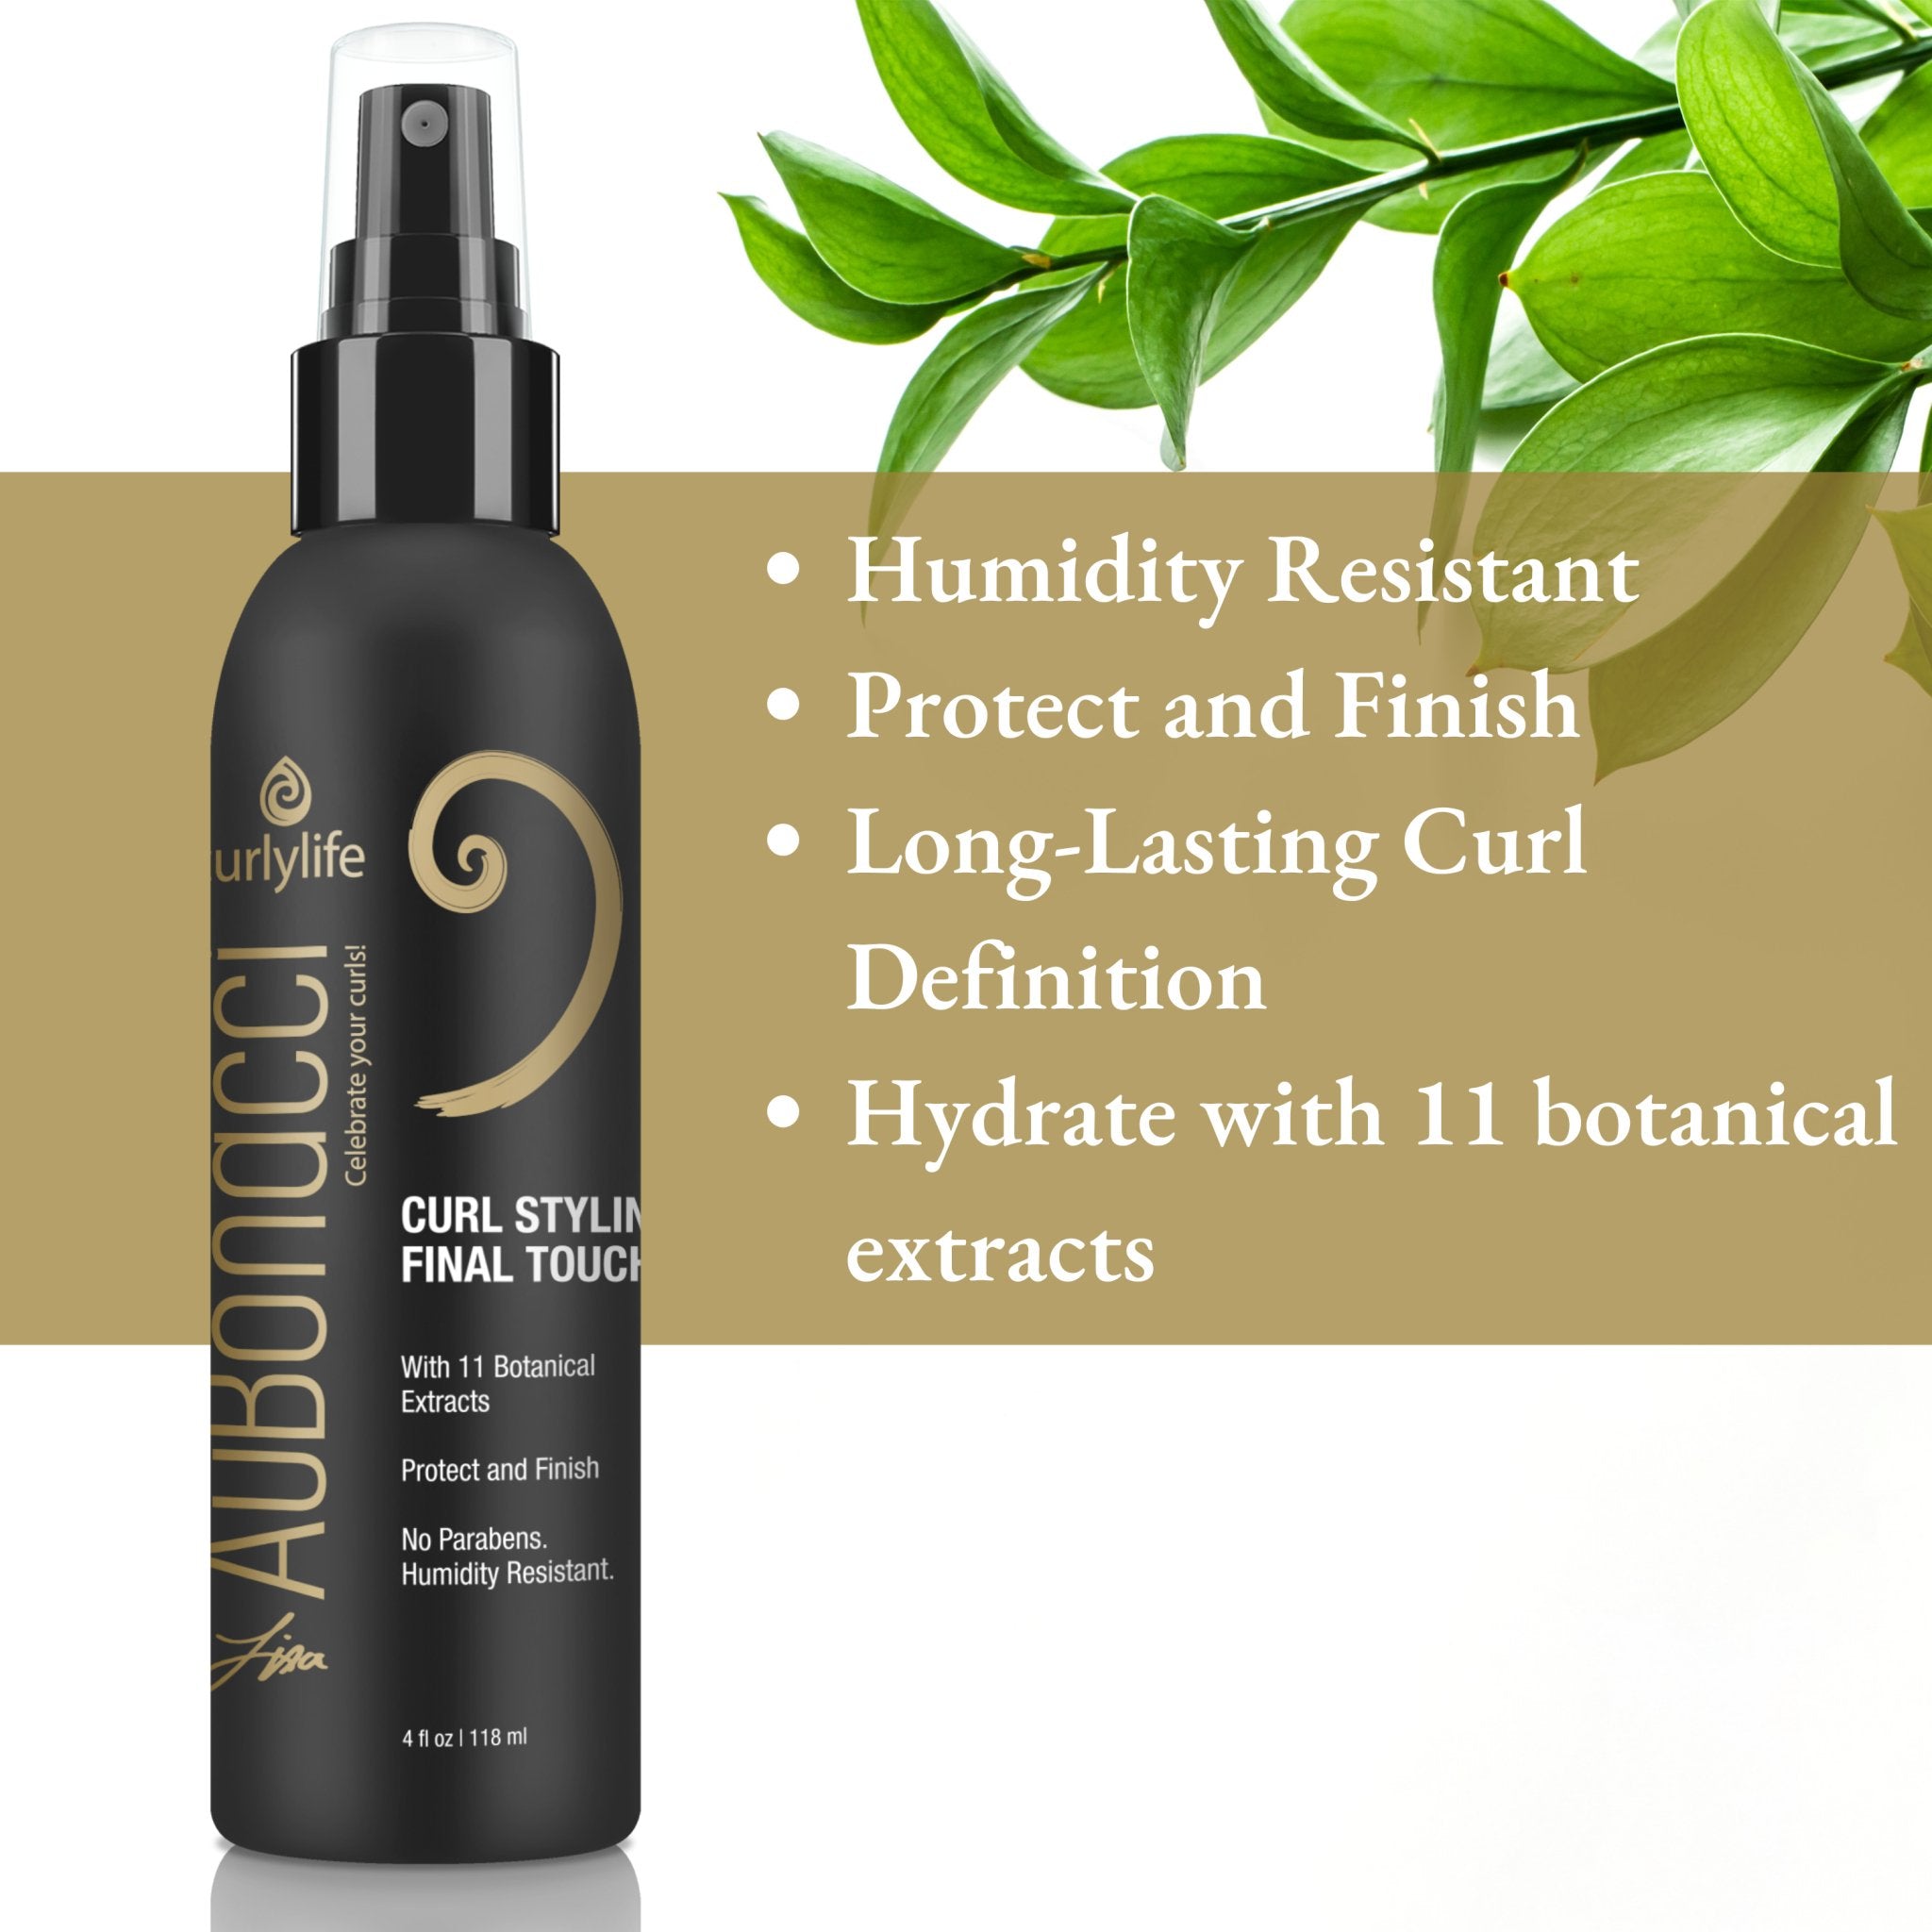 AuBonacci Curl Styling Final Touch 4oz - Protect and Finish - curlylife